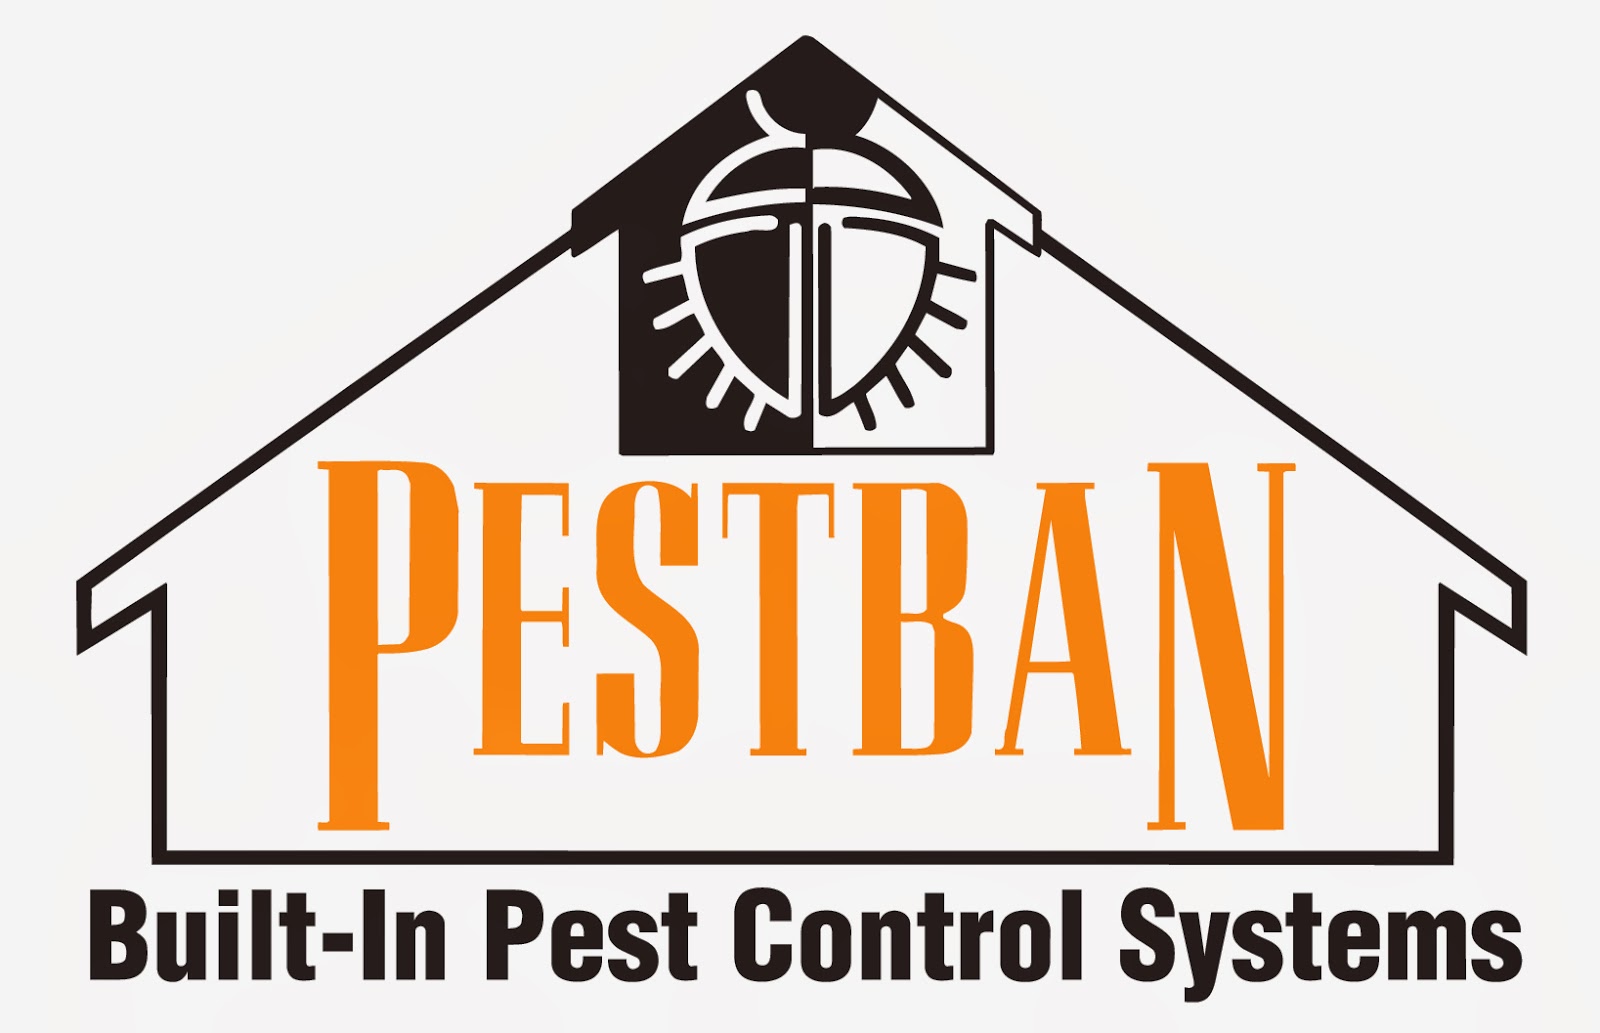 HBA of Greenville Members- FREE home show tickets courtesy of PestBan.